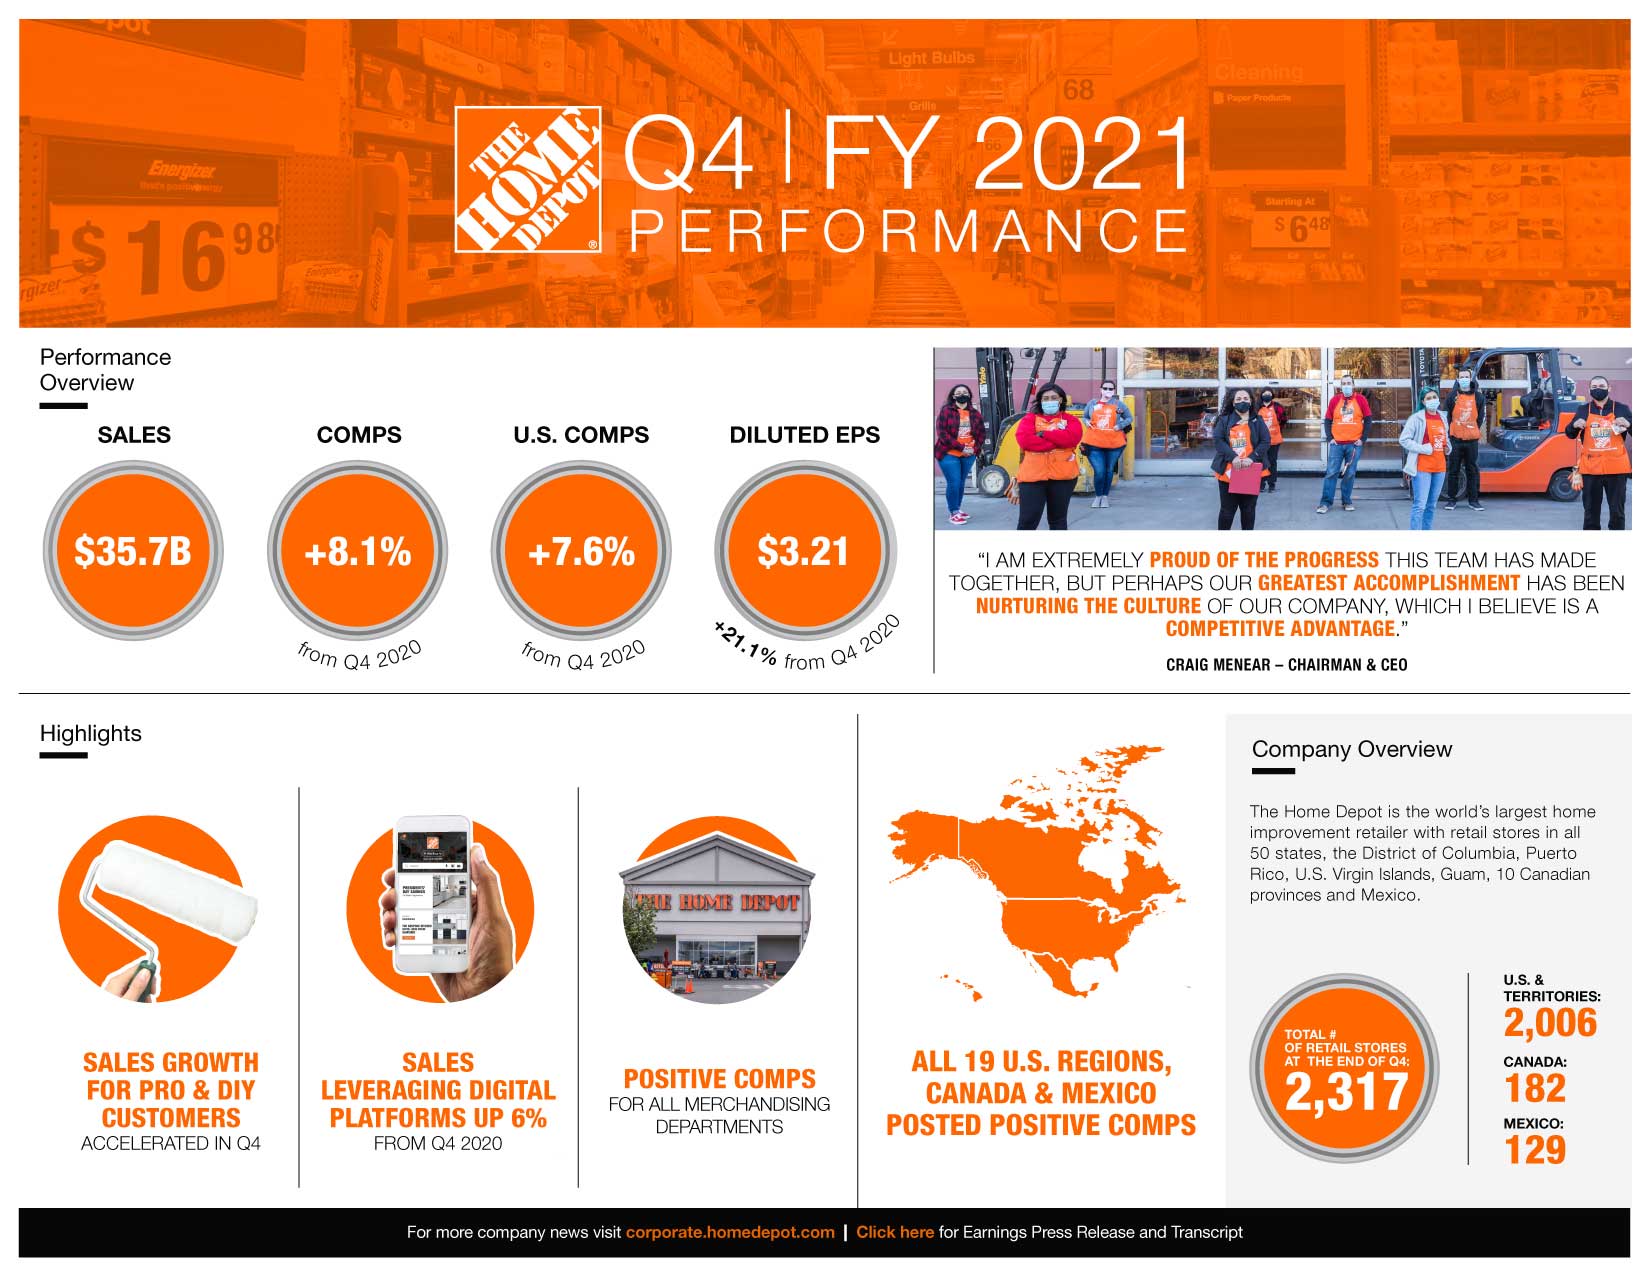 The Home Depot | Newsroom Image_Q4 INFOGRAPHIC 2021_Infograpic Image